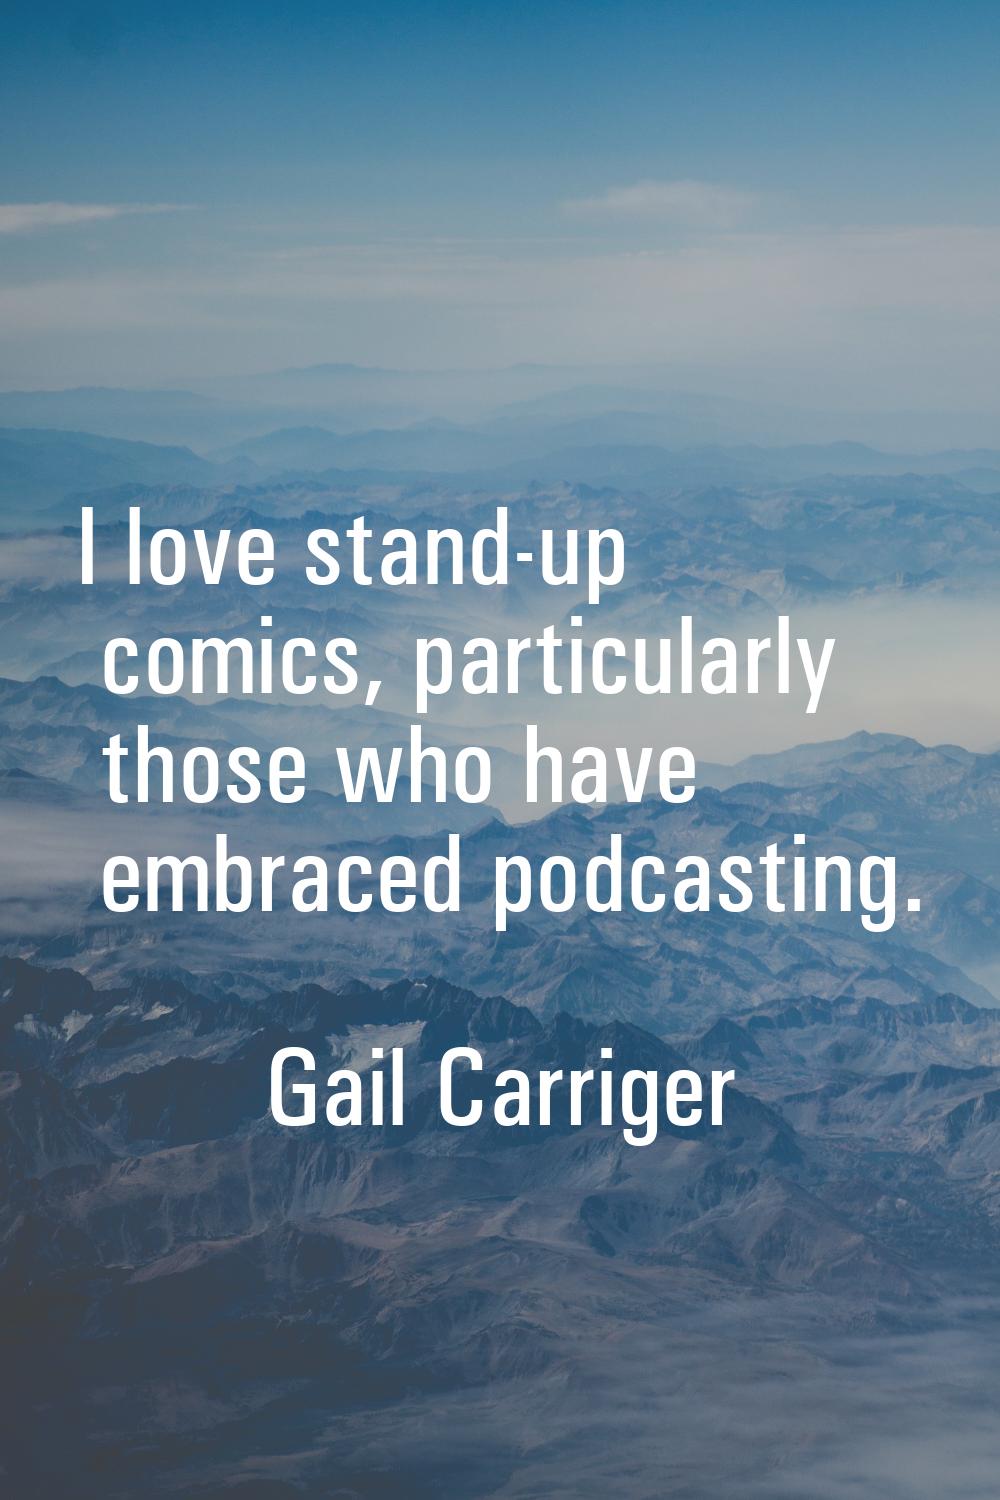 I love stand-up comics, particularly those who have embraced podcasting.